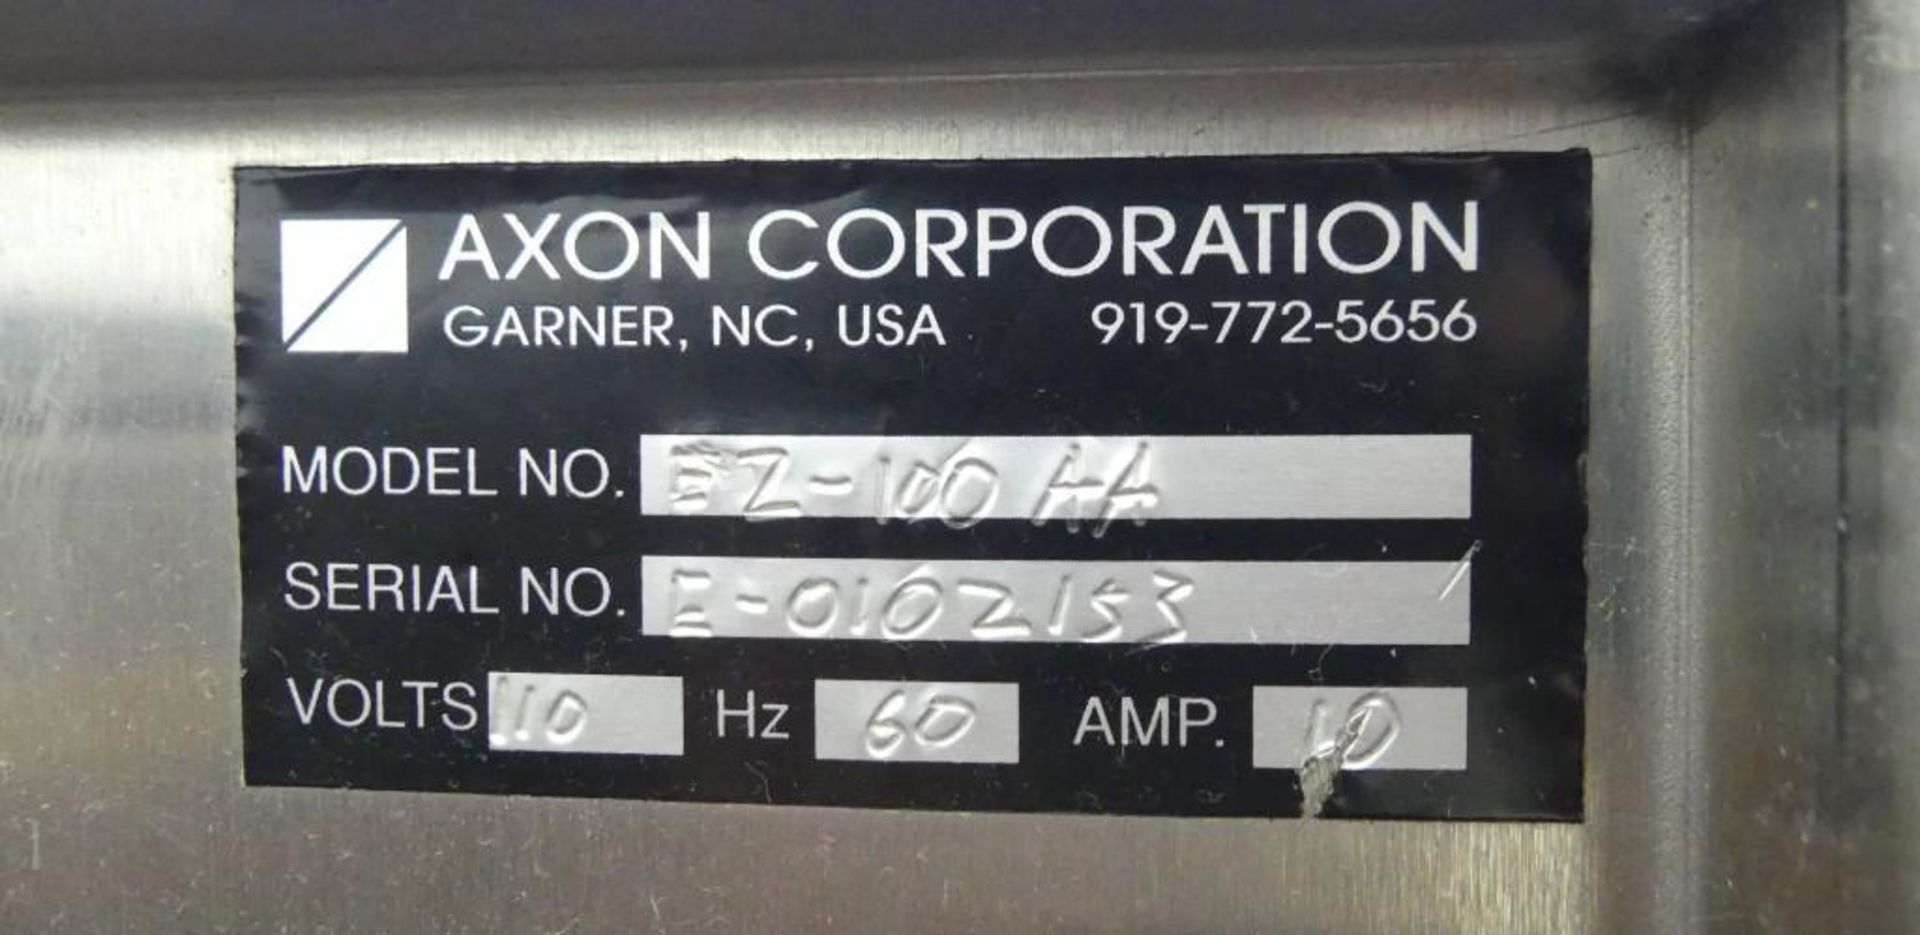 Axon EZ-100 Stainless Steel Sleeve Applicator with Marburg Industries Heat Tunnel - Image 14 of 41